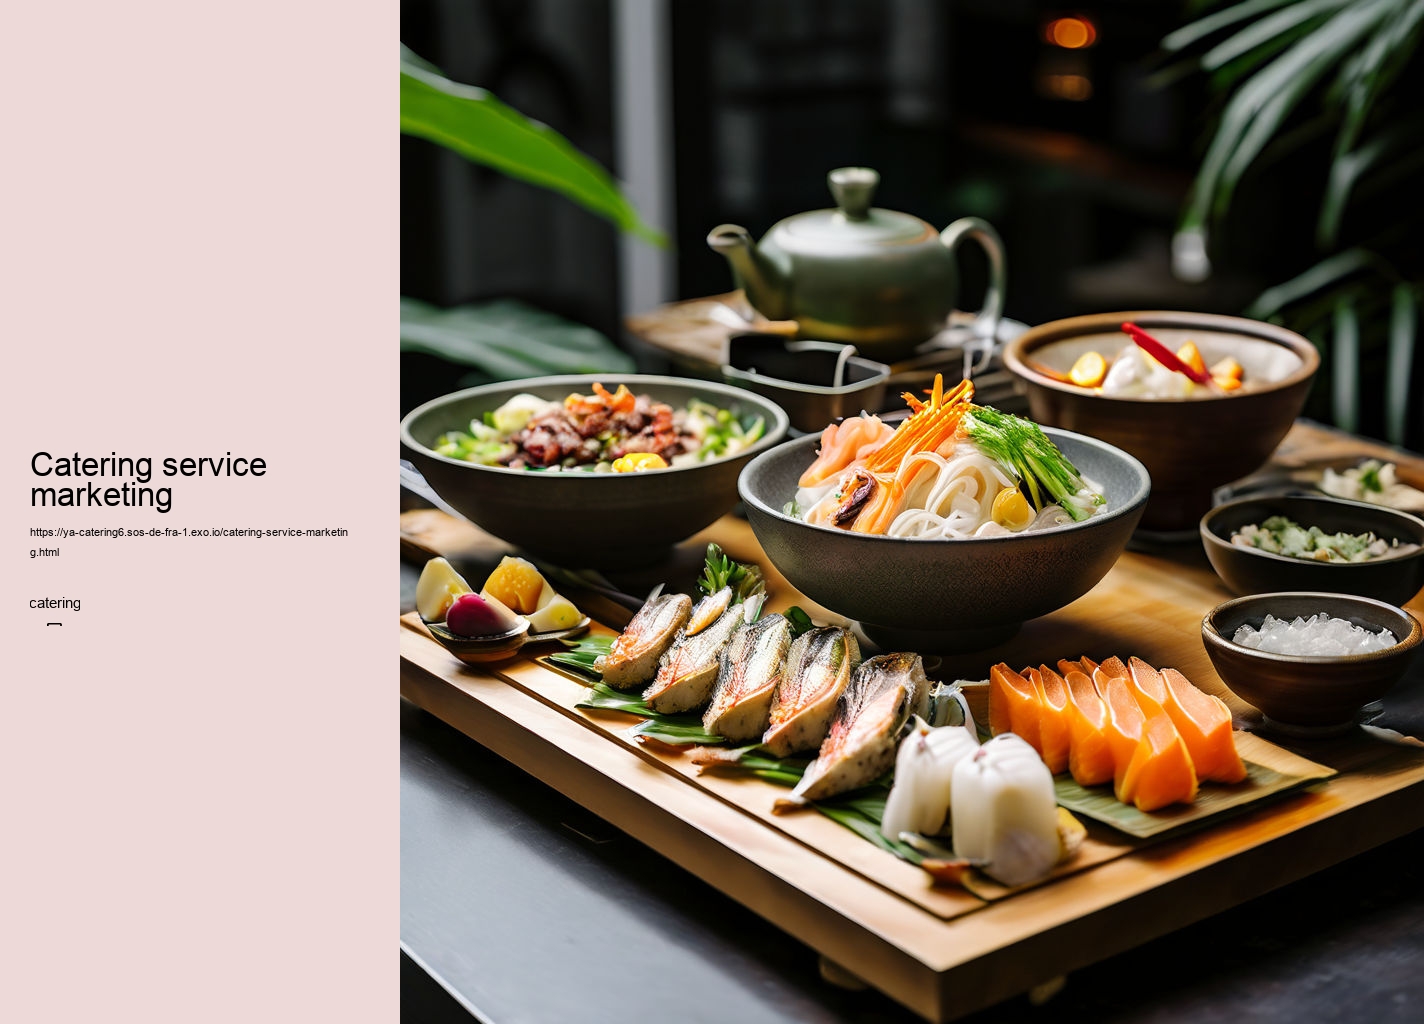 Catering service marketing